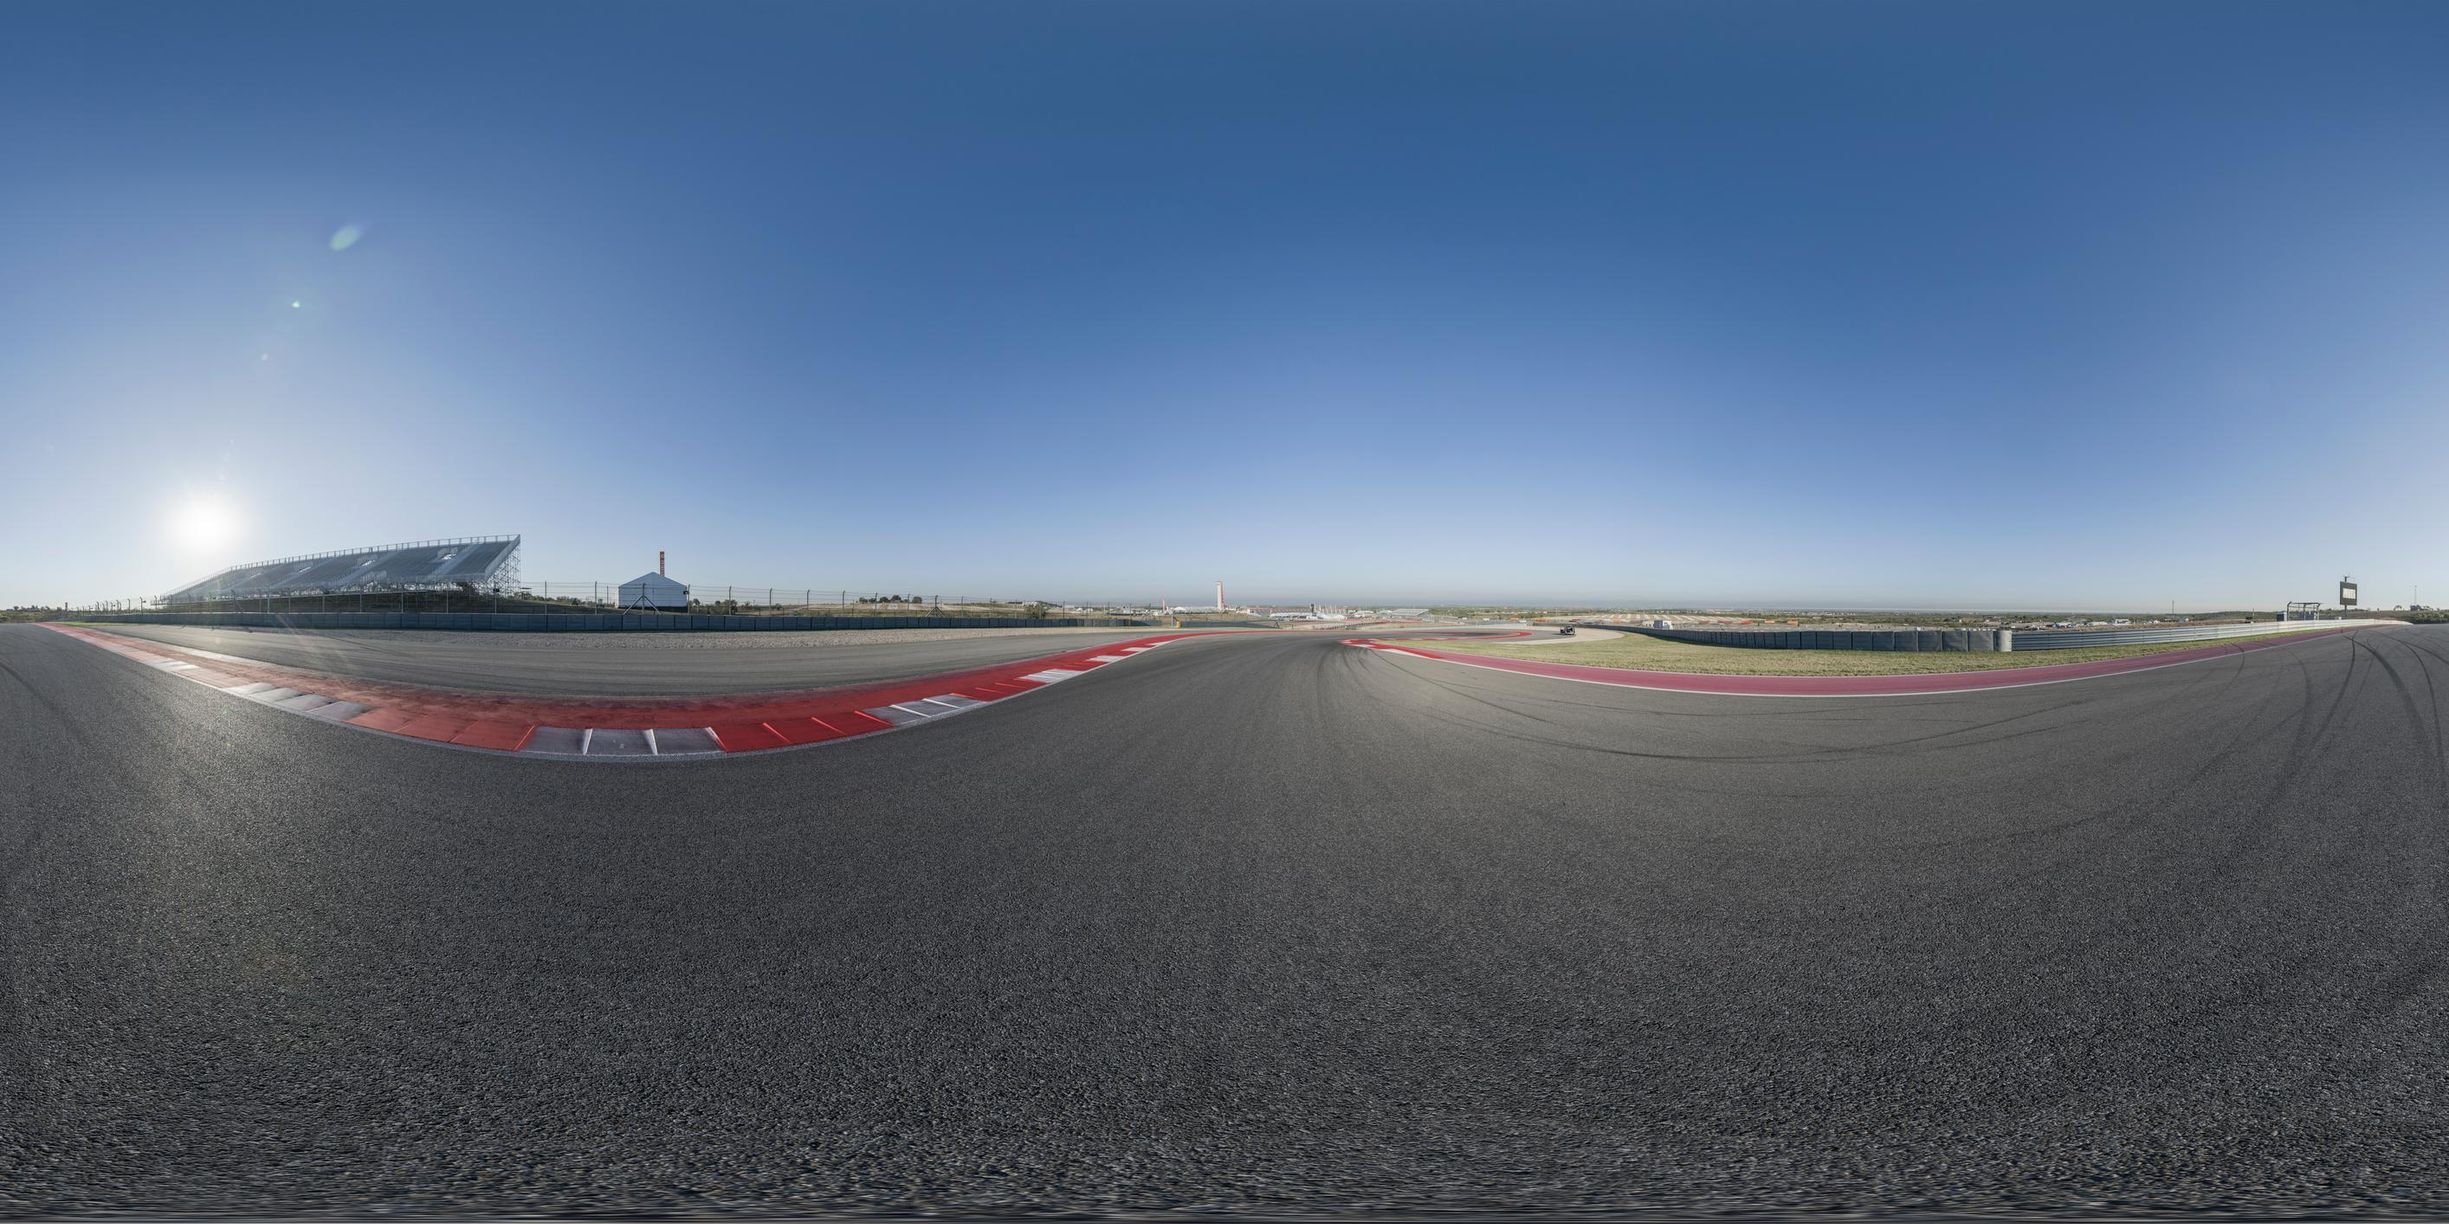 an empty race track is shown from the side on a sunny day with blue sky